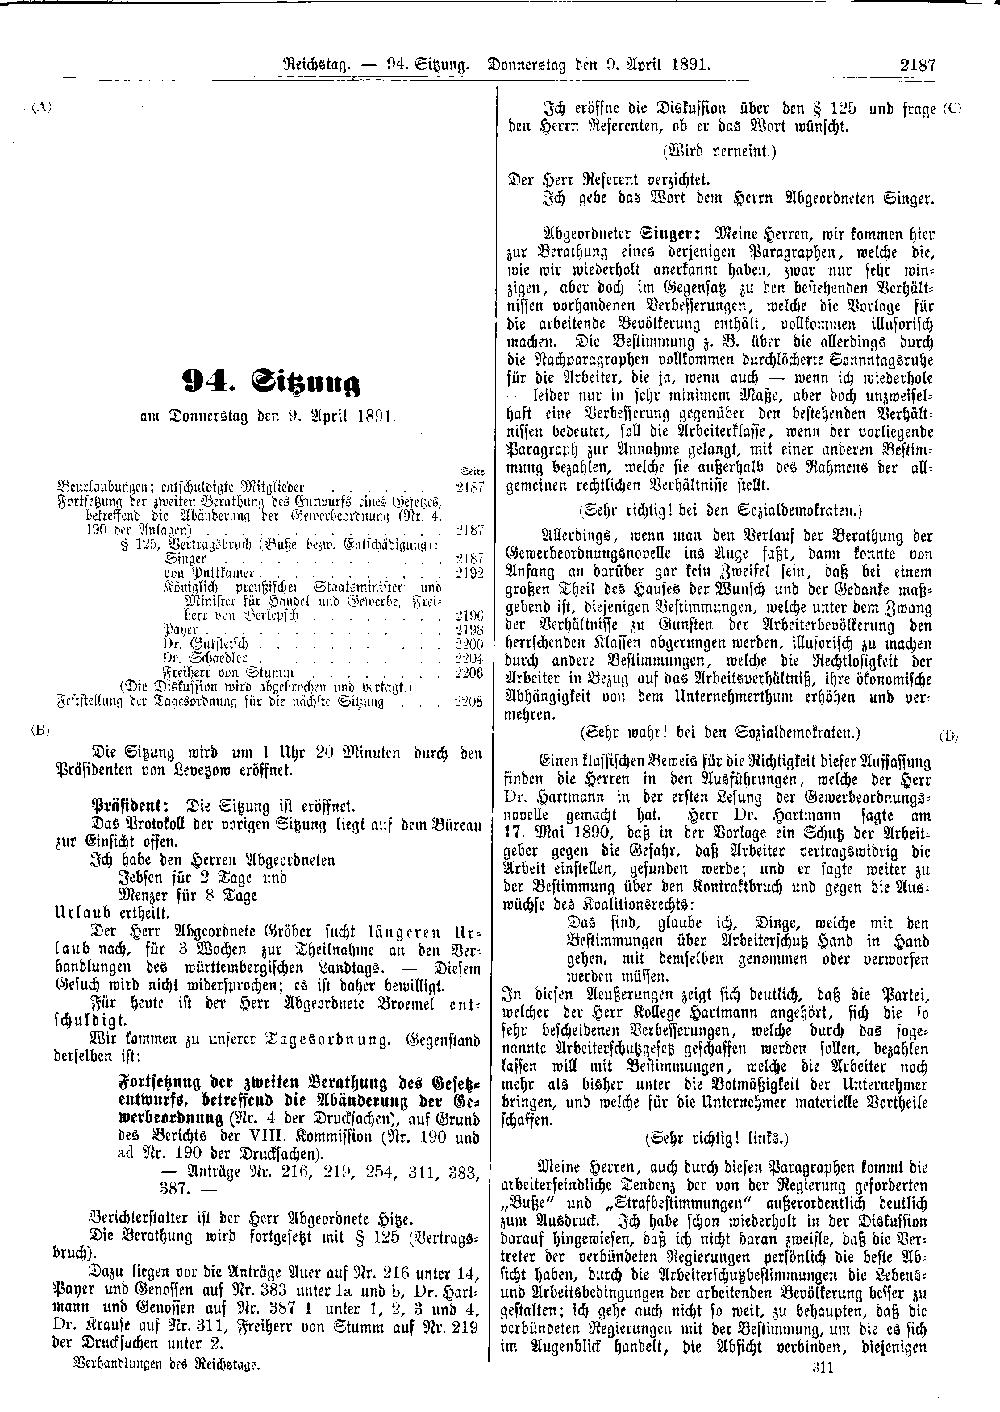 Scan of page 2187